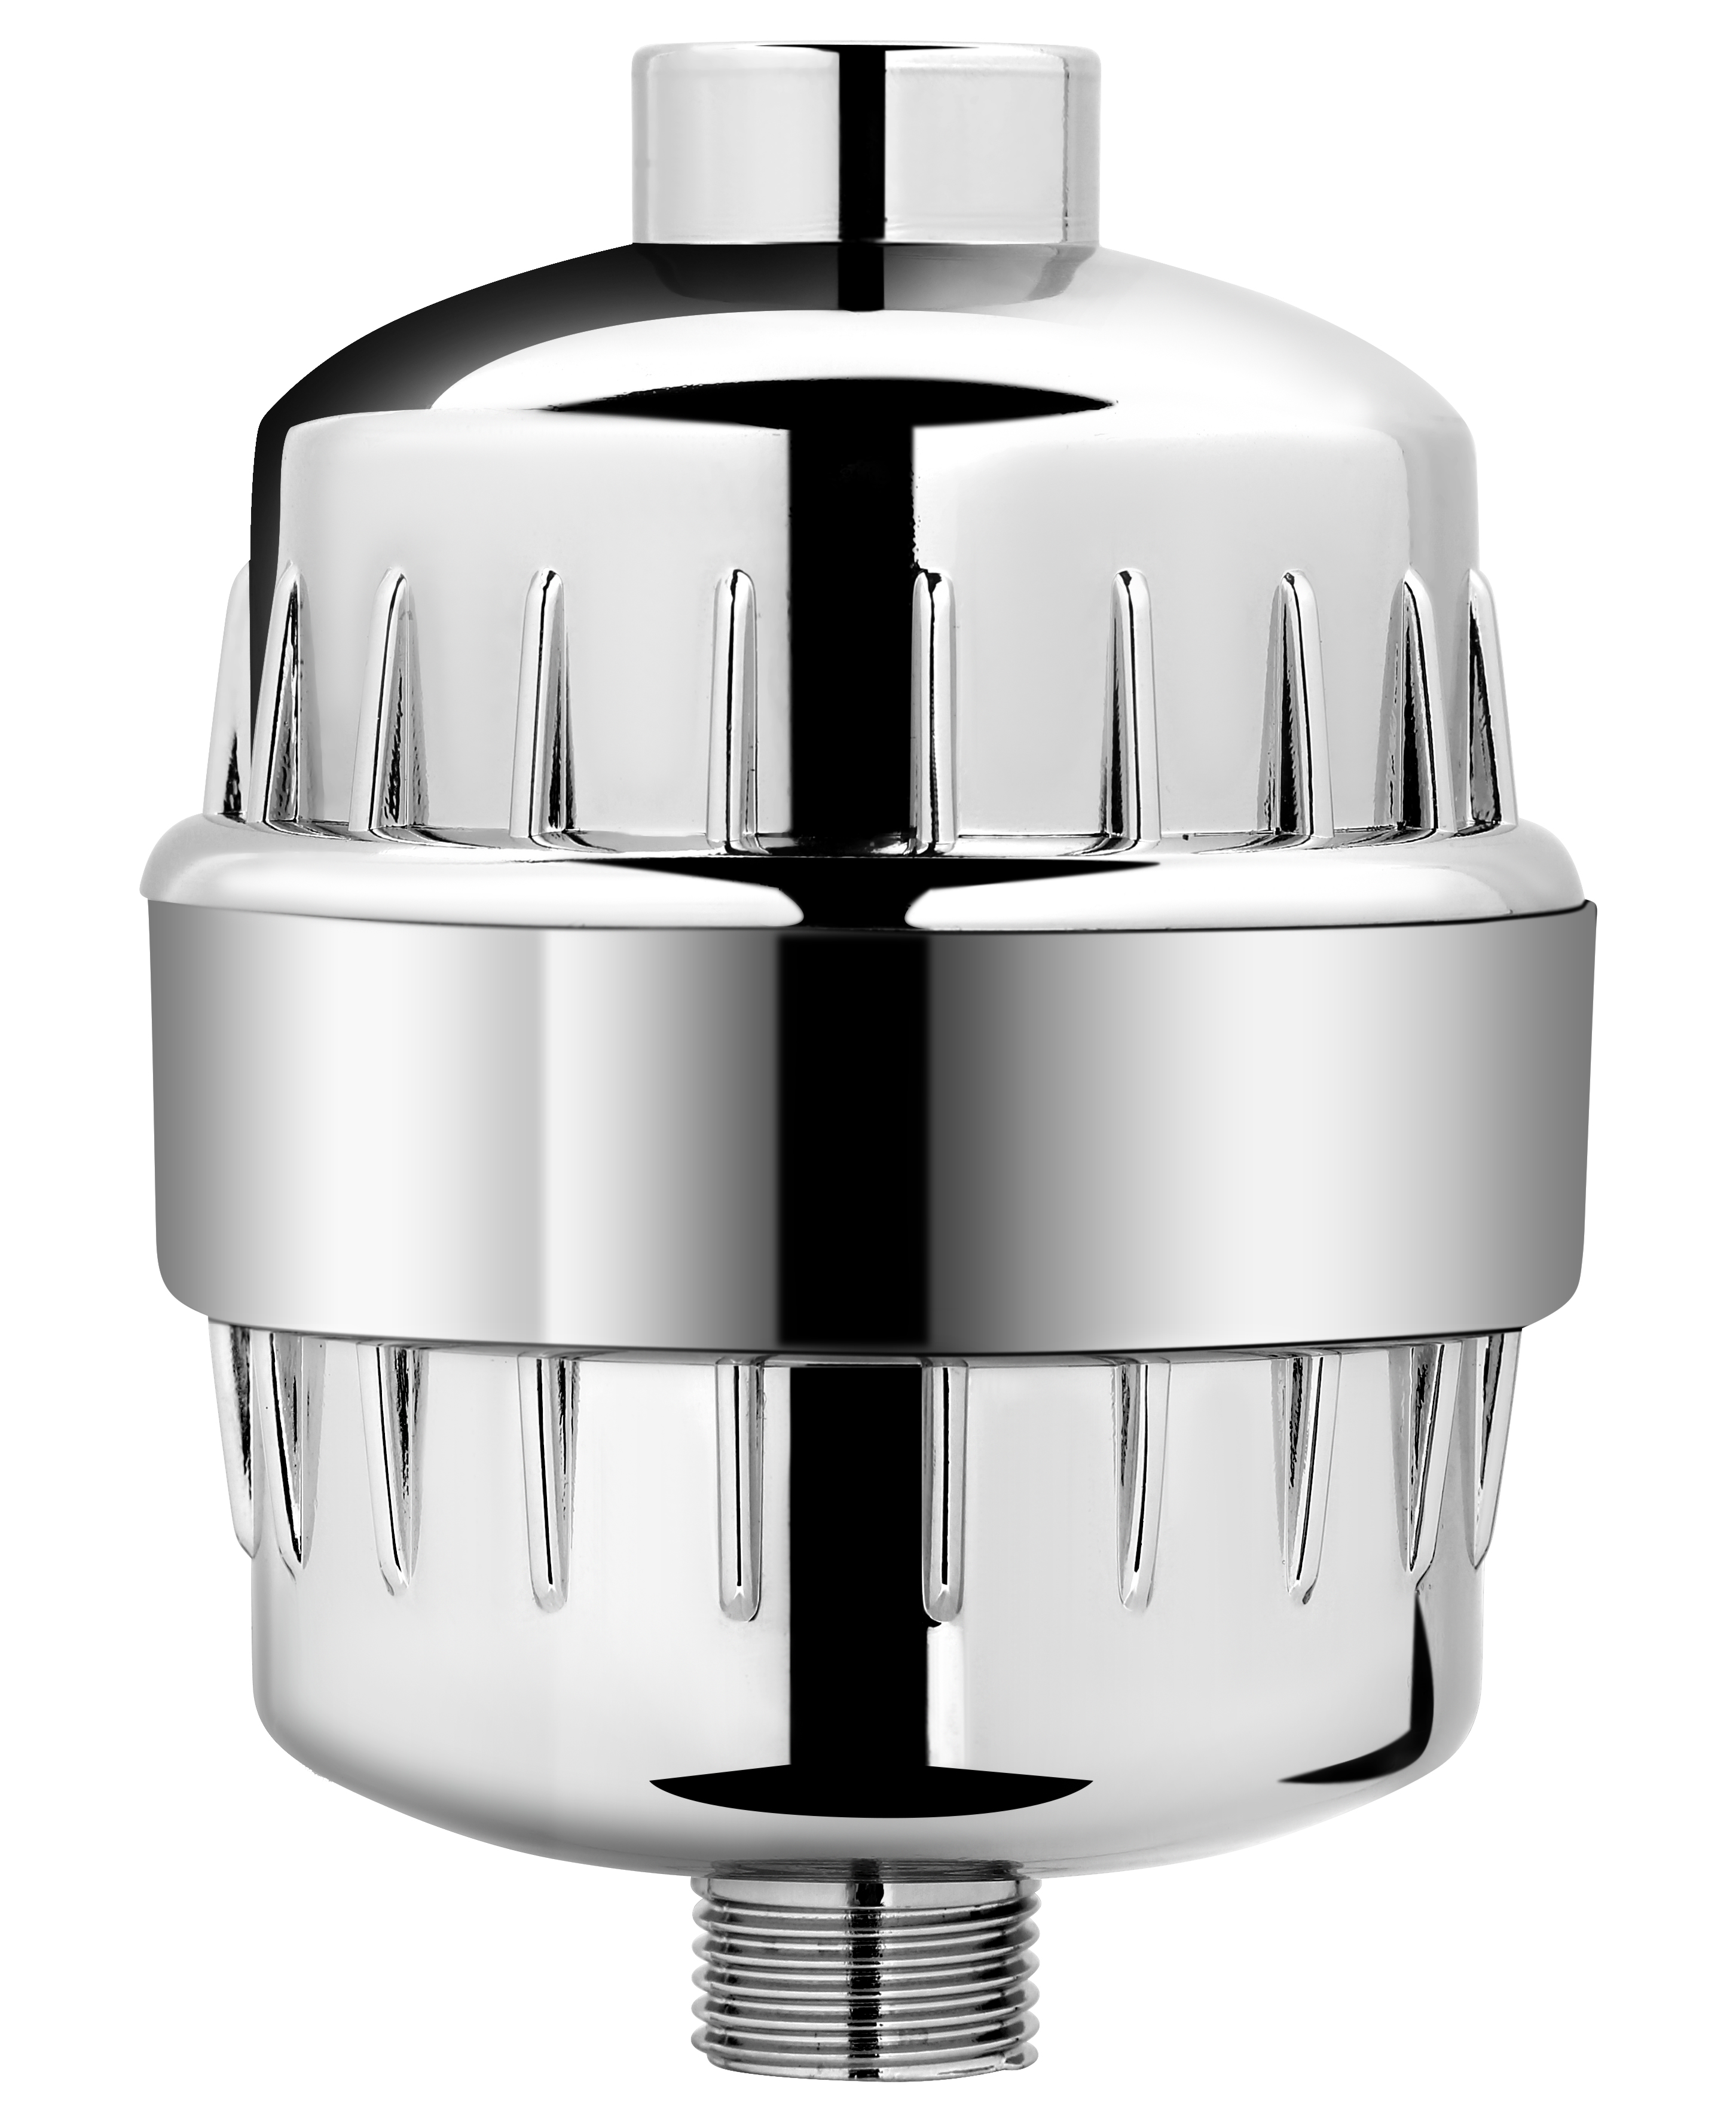 AquaBliss' Top Selling Shower Filter Available with [ 2904 x 3532 Pixel ]